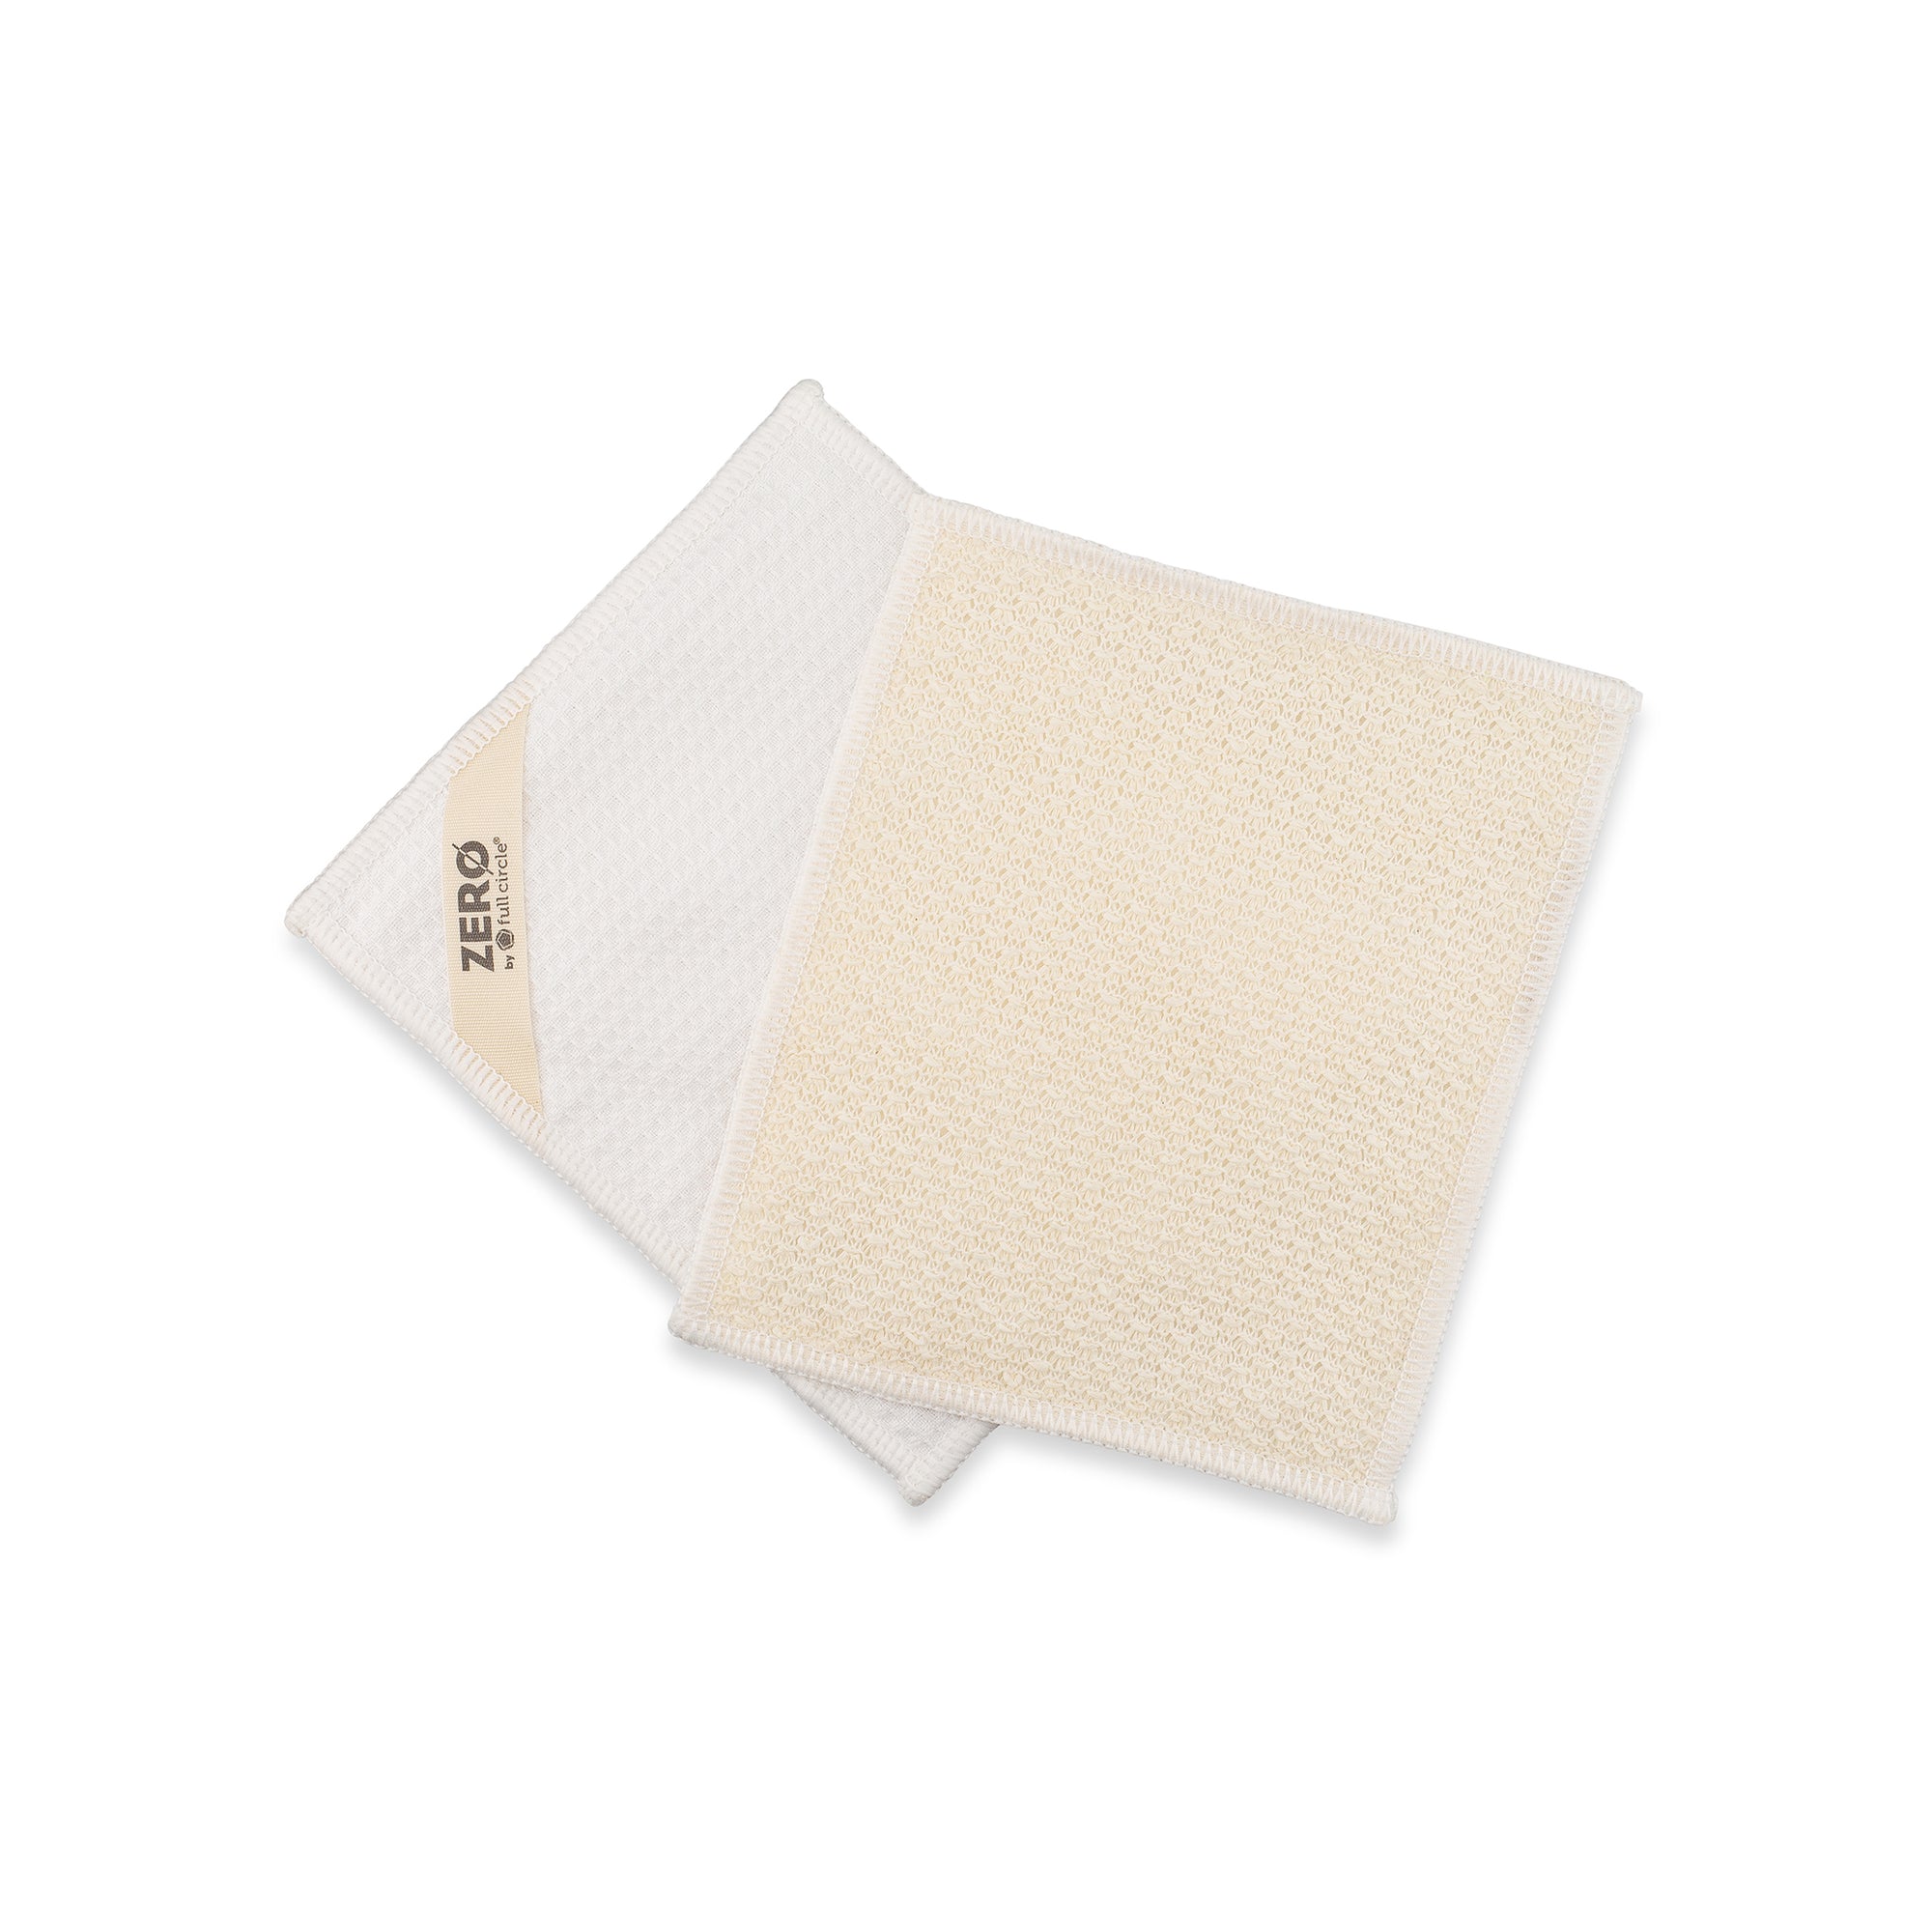 Dish Cloth with Dish Soapcleaning Towels Disposable Dish Cloths, Instantly Cuts Through Grease,reusable Dish Paper, The Ideal for Cleaning and Scrubbi